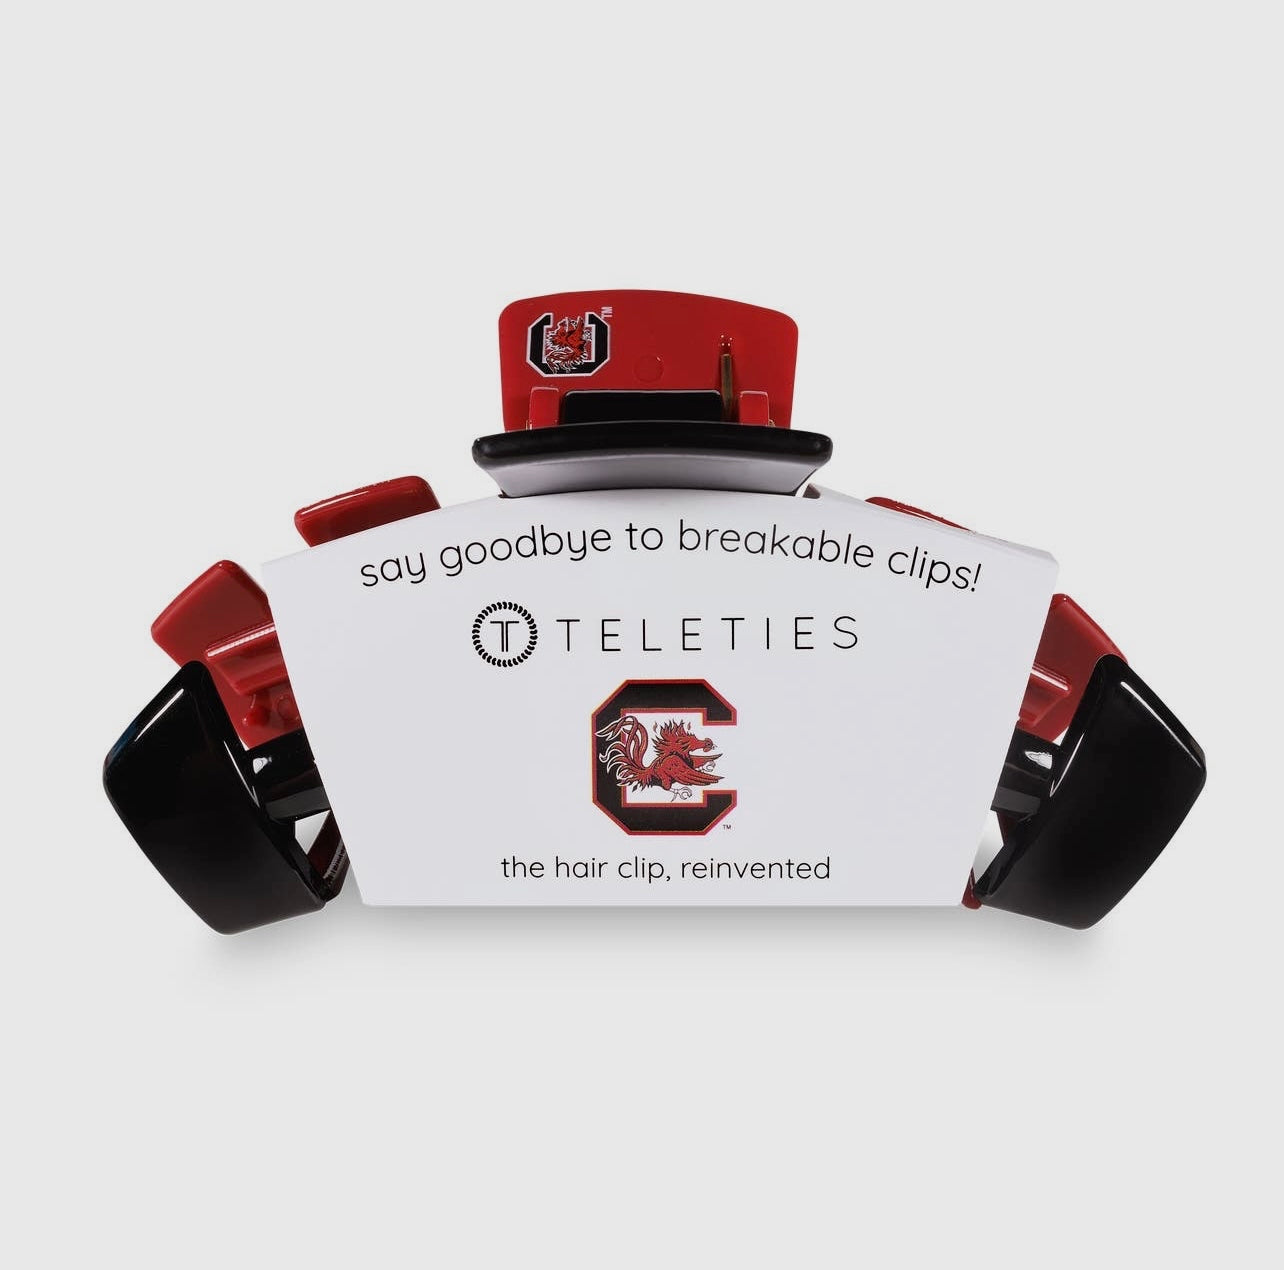 University of South Carolina Collegiate Teletie Claw Clip in garnet and black. Side view with packaging.